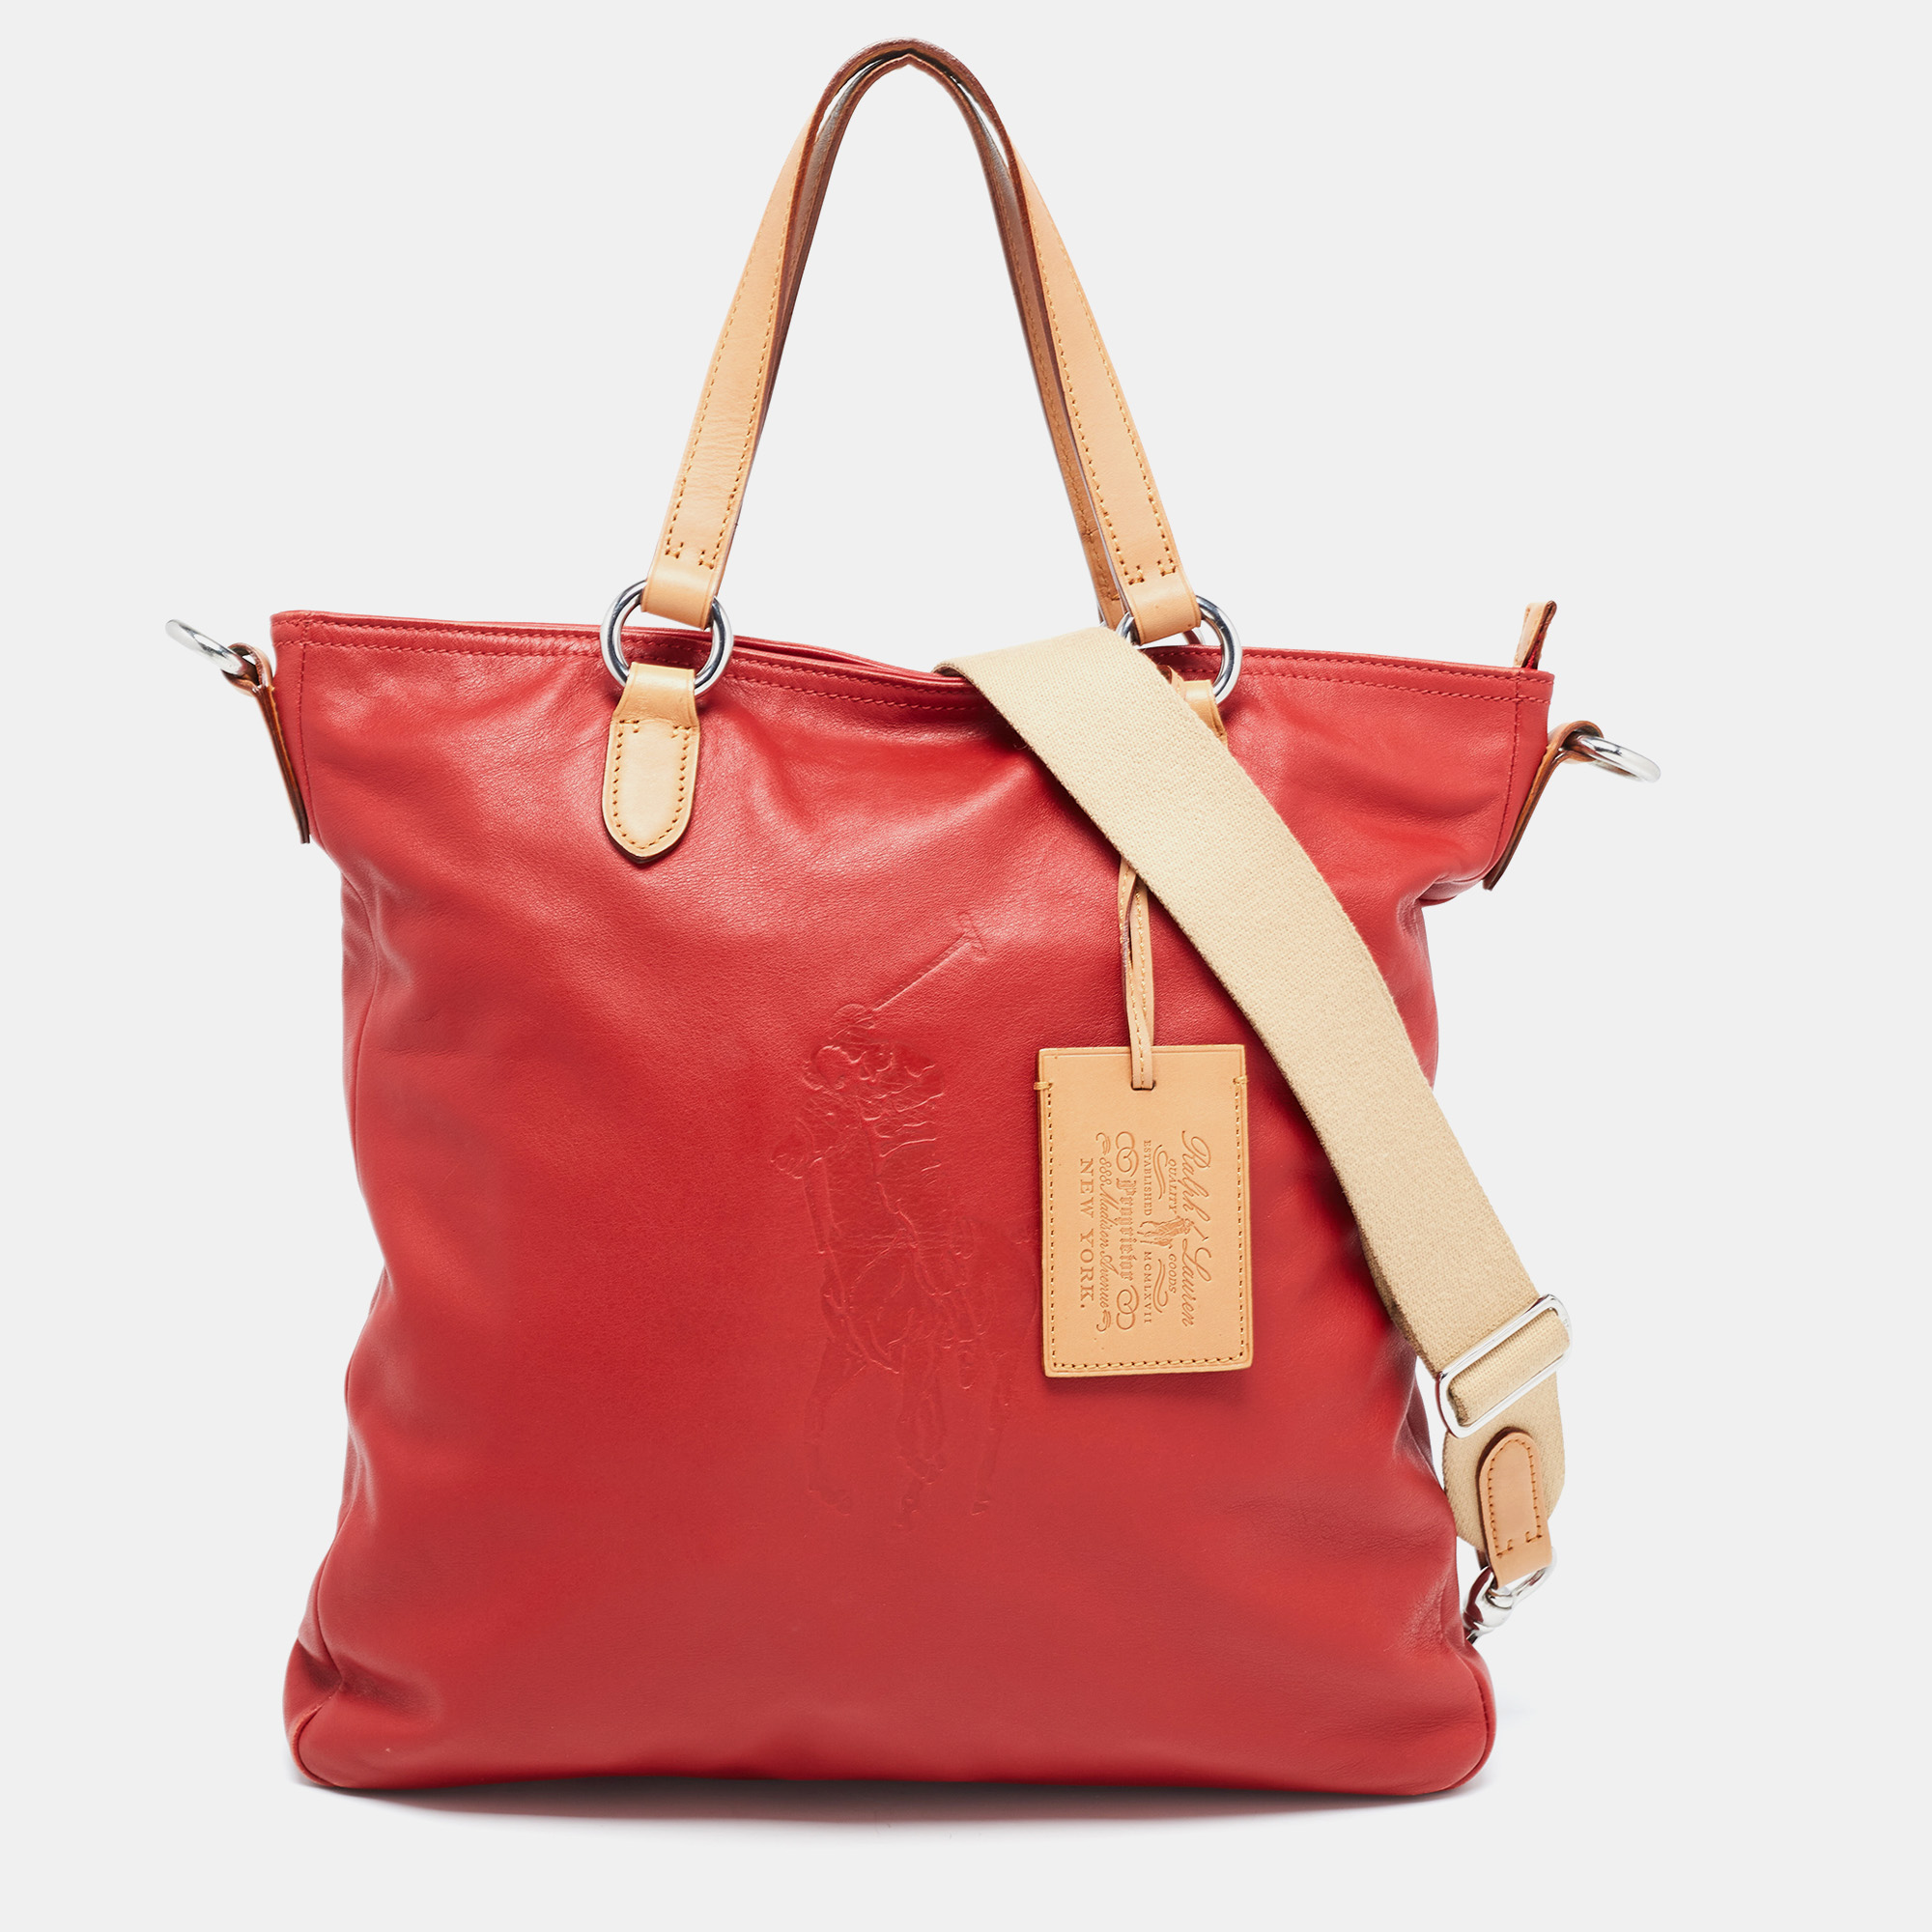 Pre-owned Ralph Lauren Red/tan Leather Shopper Tote